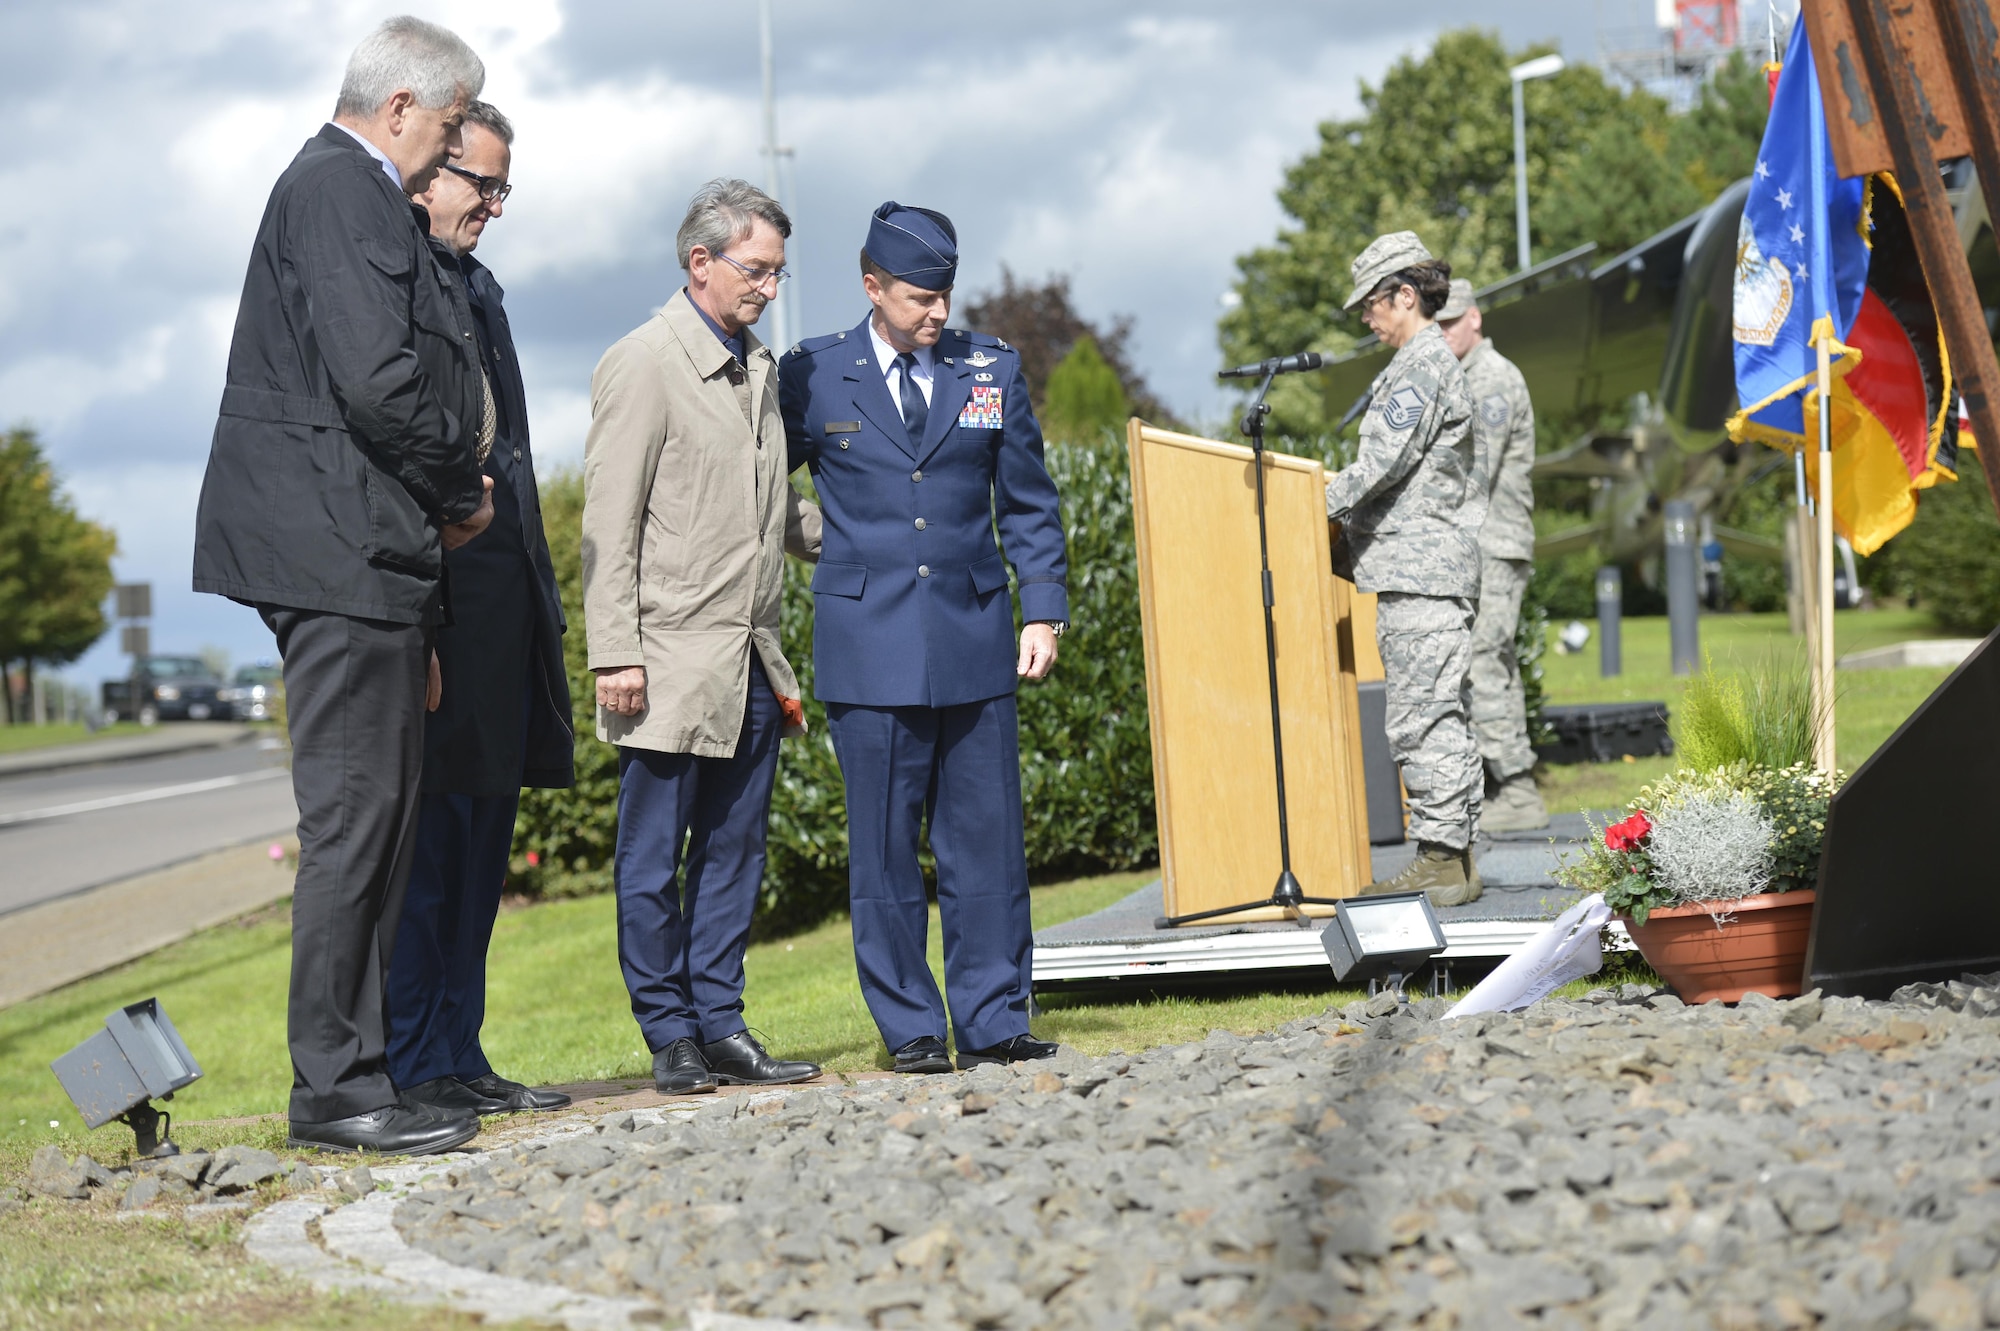 U.S. Air Force Col. Tad Clark, 52nd Fighter Wing vice commander, and prominent members of the local community place a flower arrangement at the 9/11 memorial at the air park on Spangdahlem Air Base, Germany, September 11, 2017. Ceremonies throughout the Air Force and around the world took place to commemorate the 16th anniversary of the attacks on 9/11. (U.S. Air Force photo by Tech. Sgt. Chad Warren)